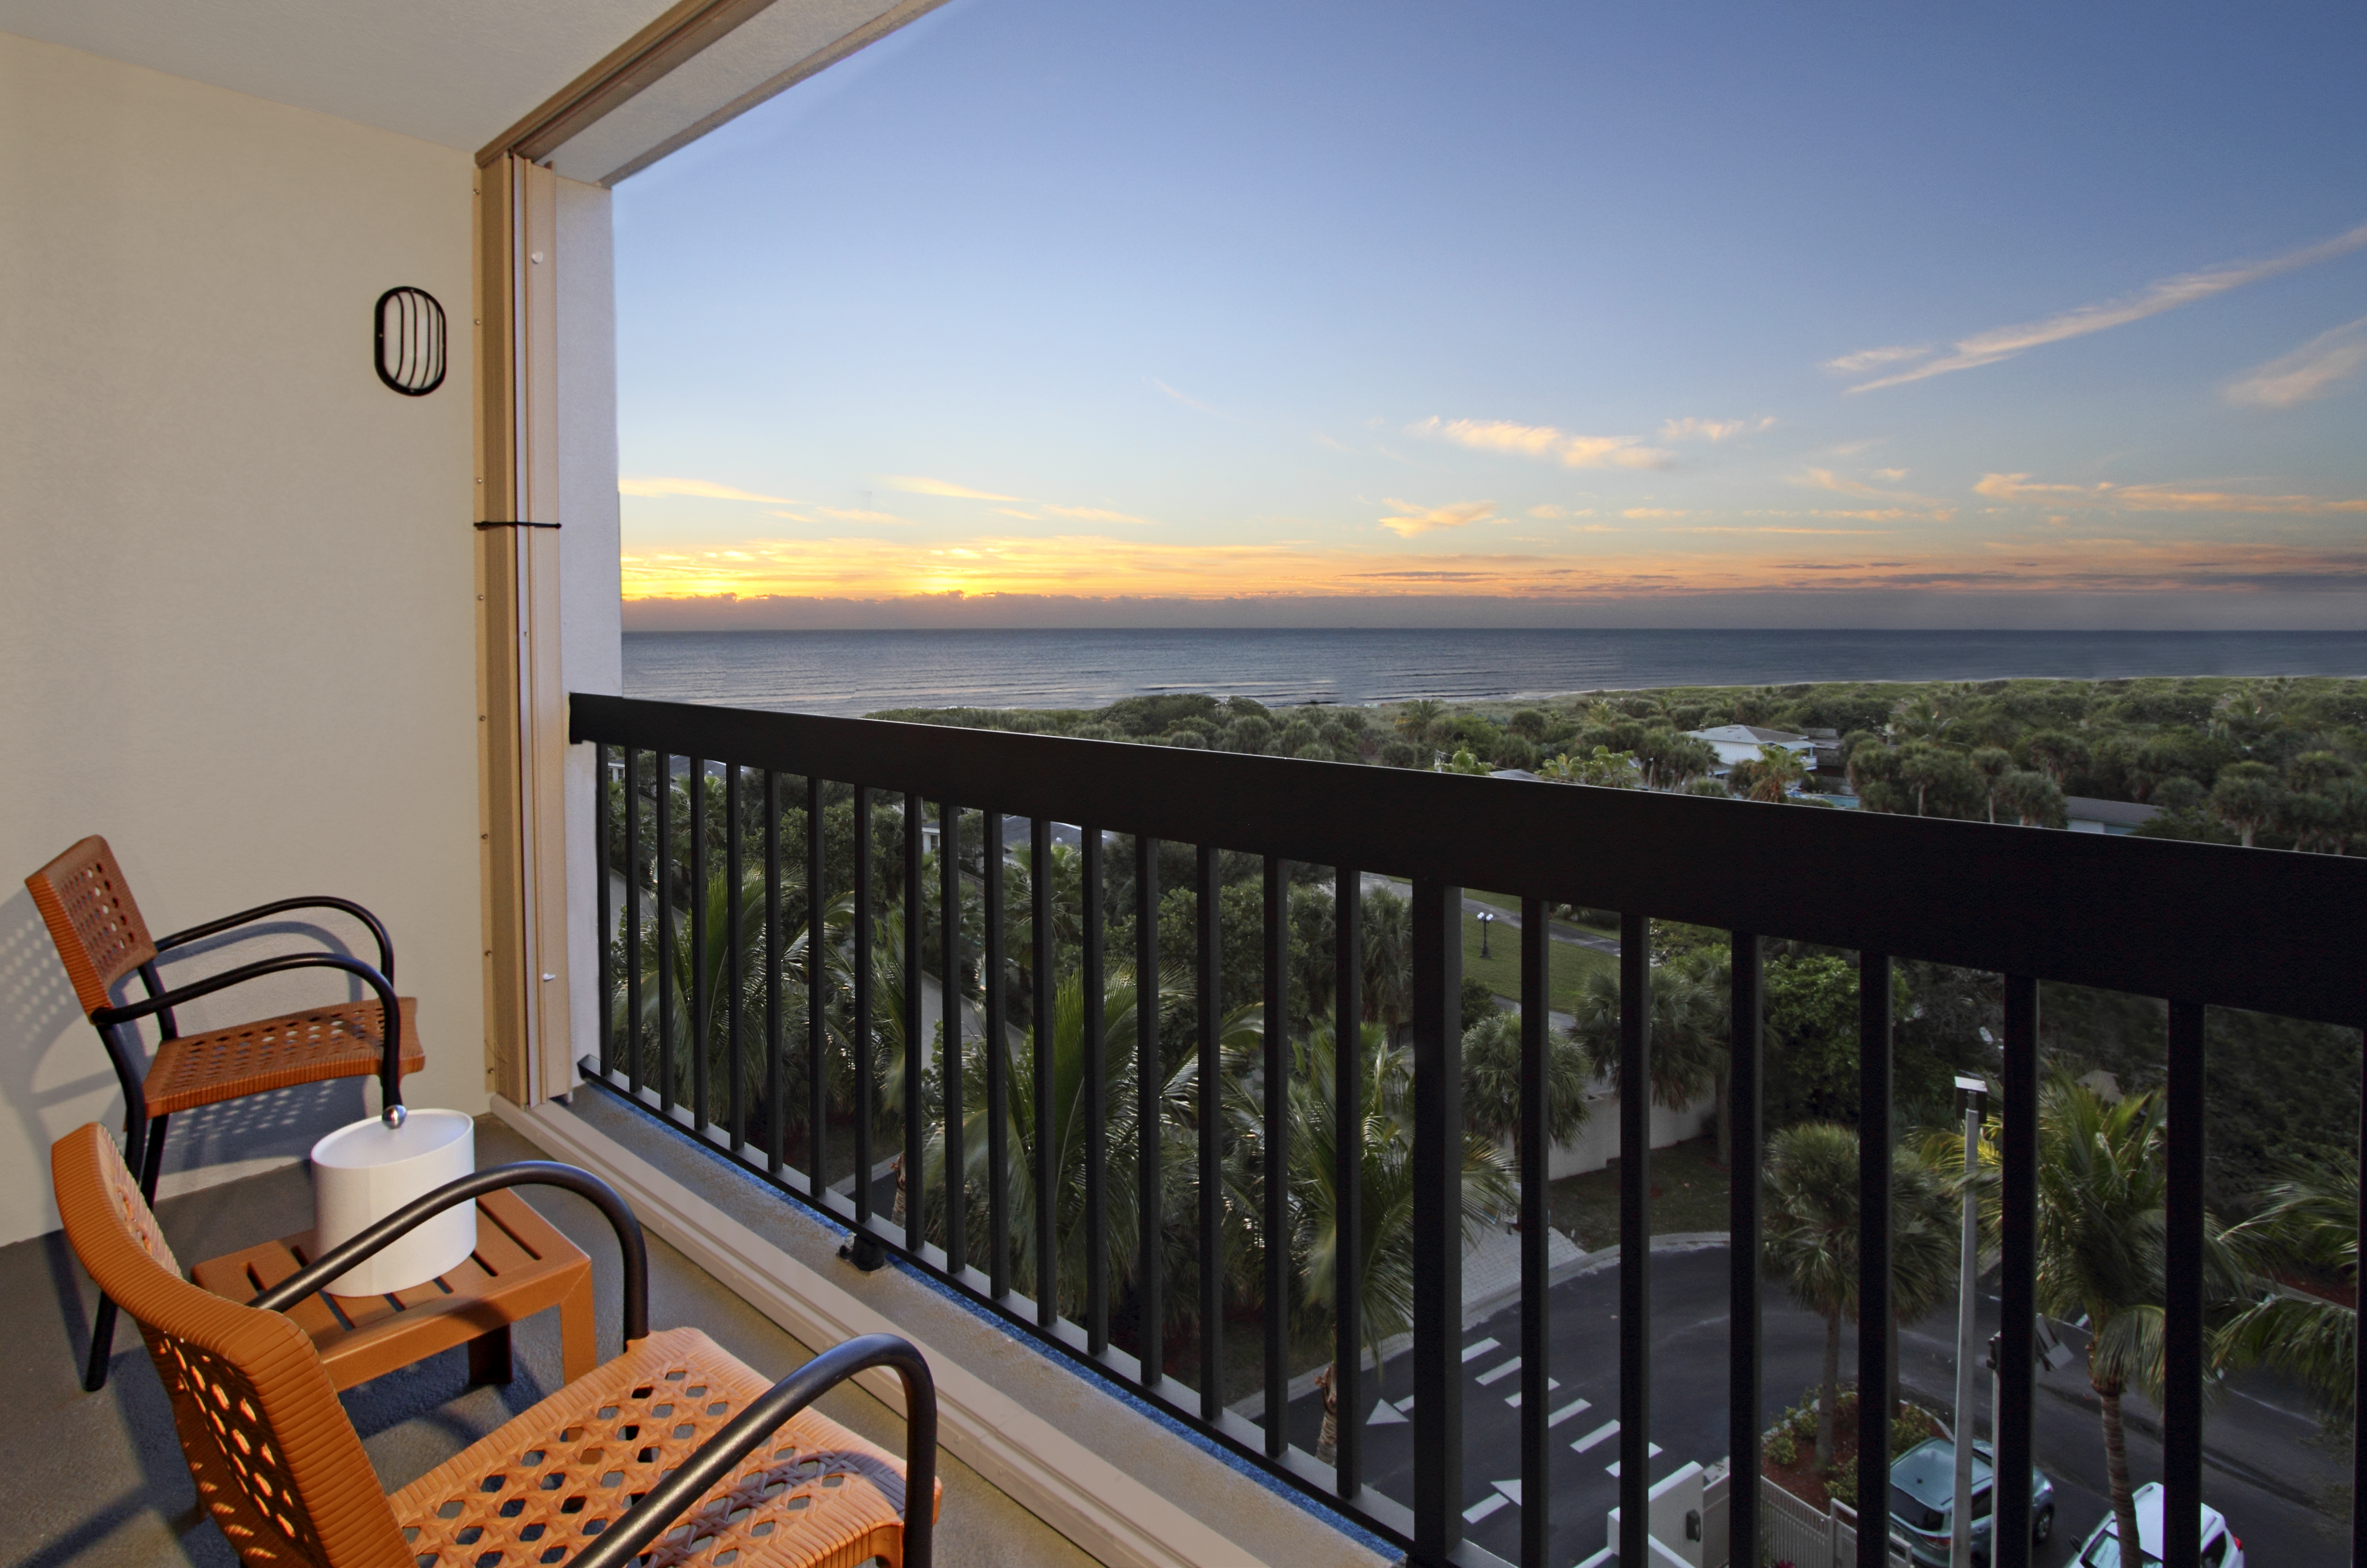 Guest Room Balcony and View of Ocean